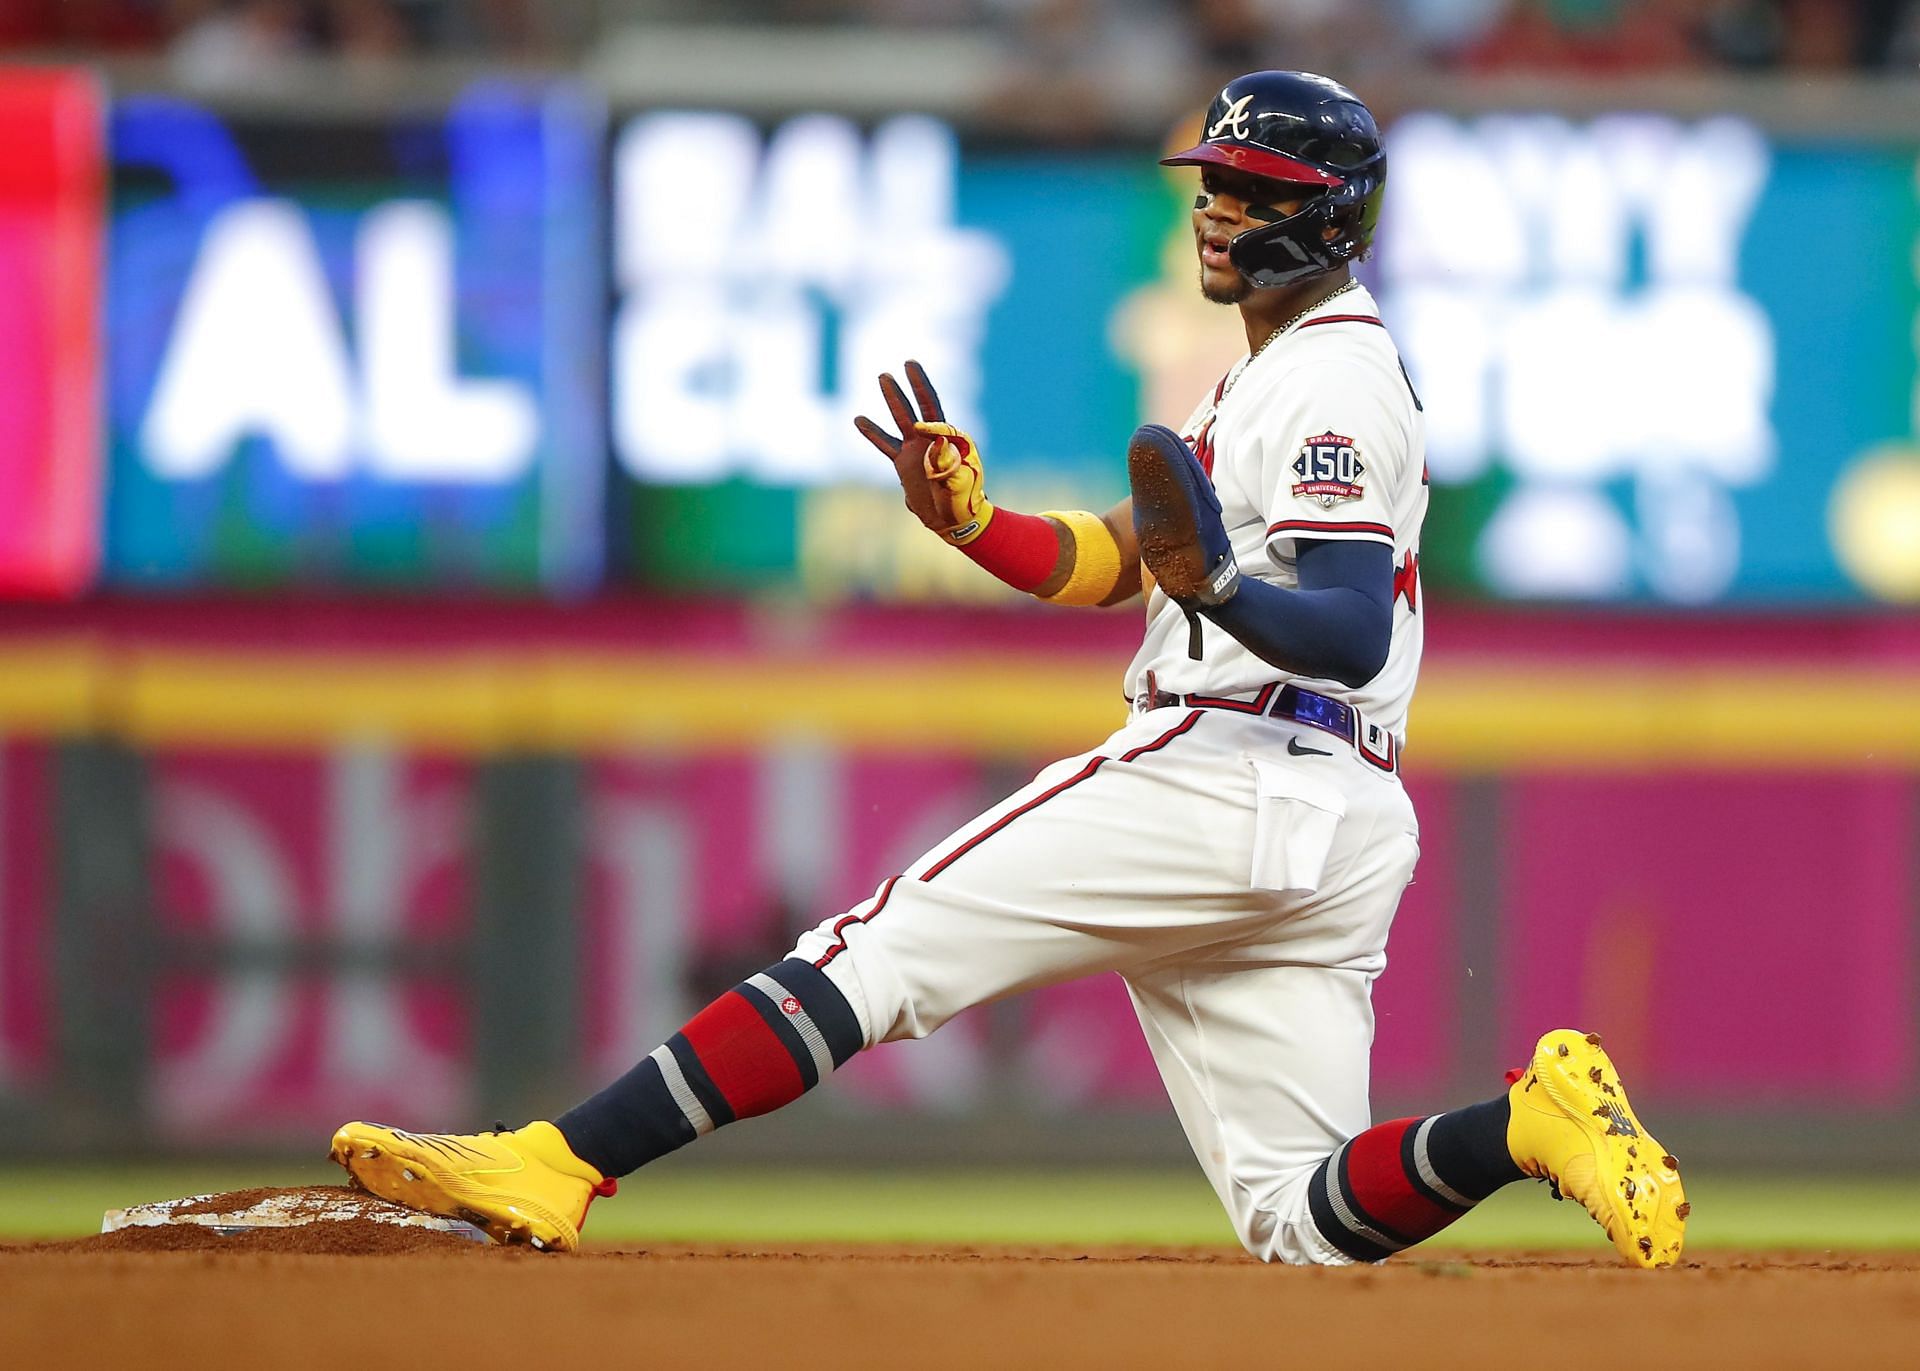 Ronald Acu&ntilde;a Jr. is just 24-years-old and one of the MLB&#039;s best players